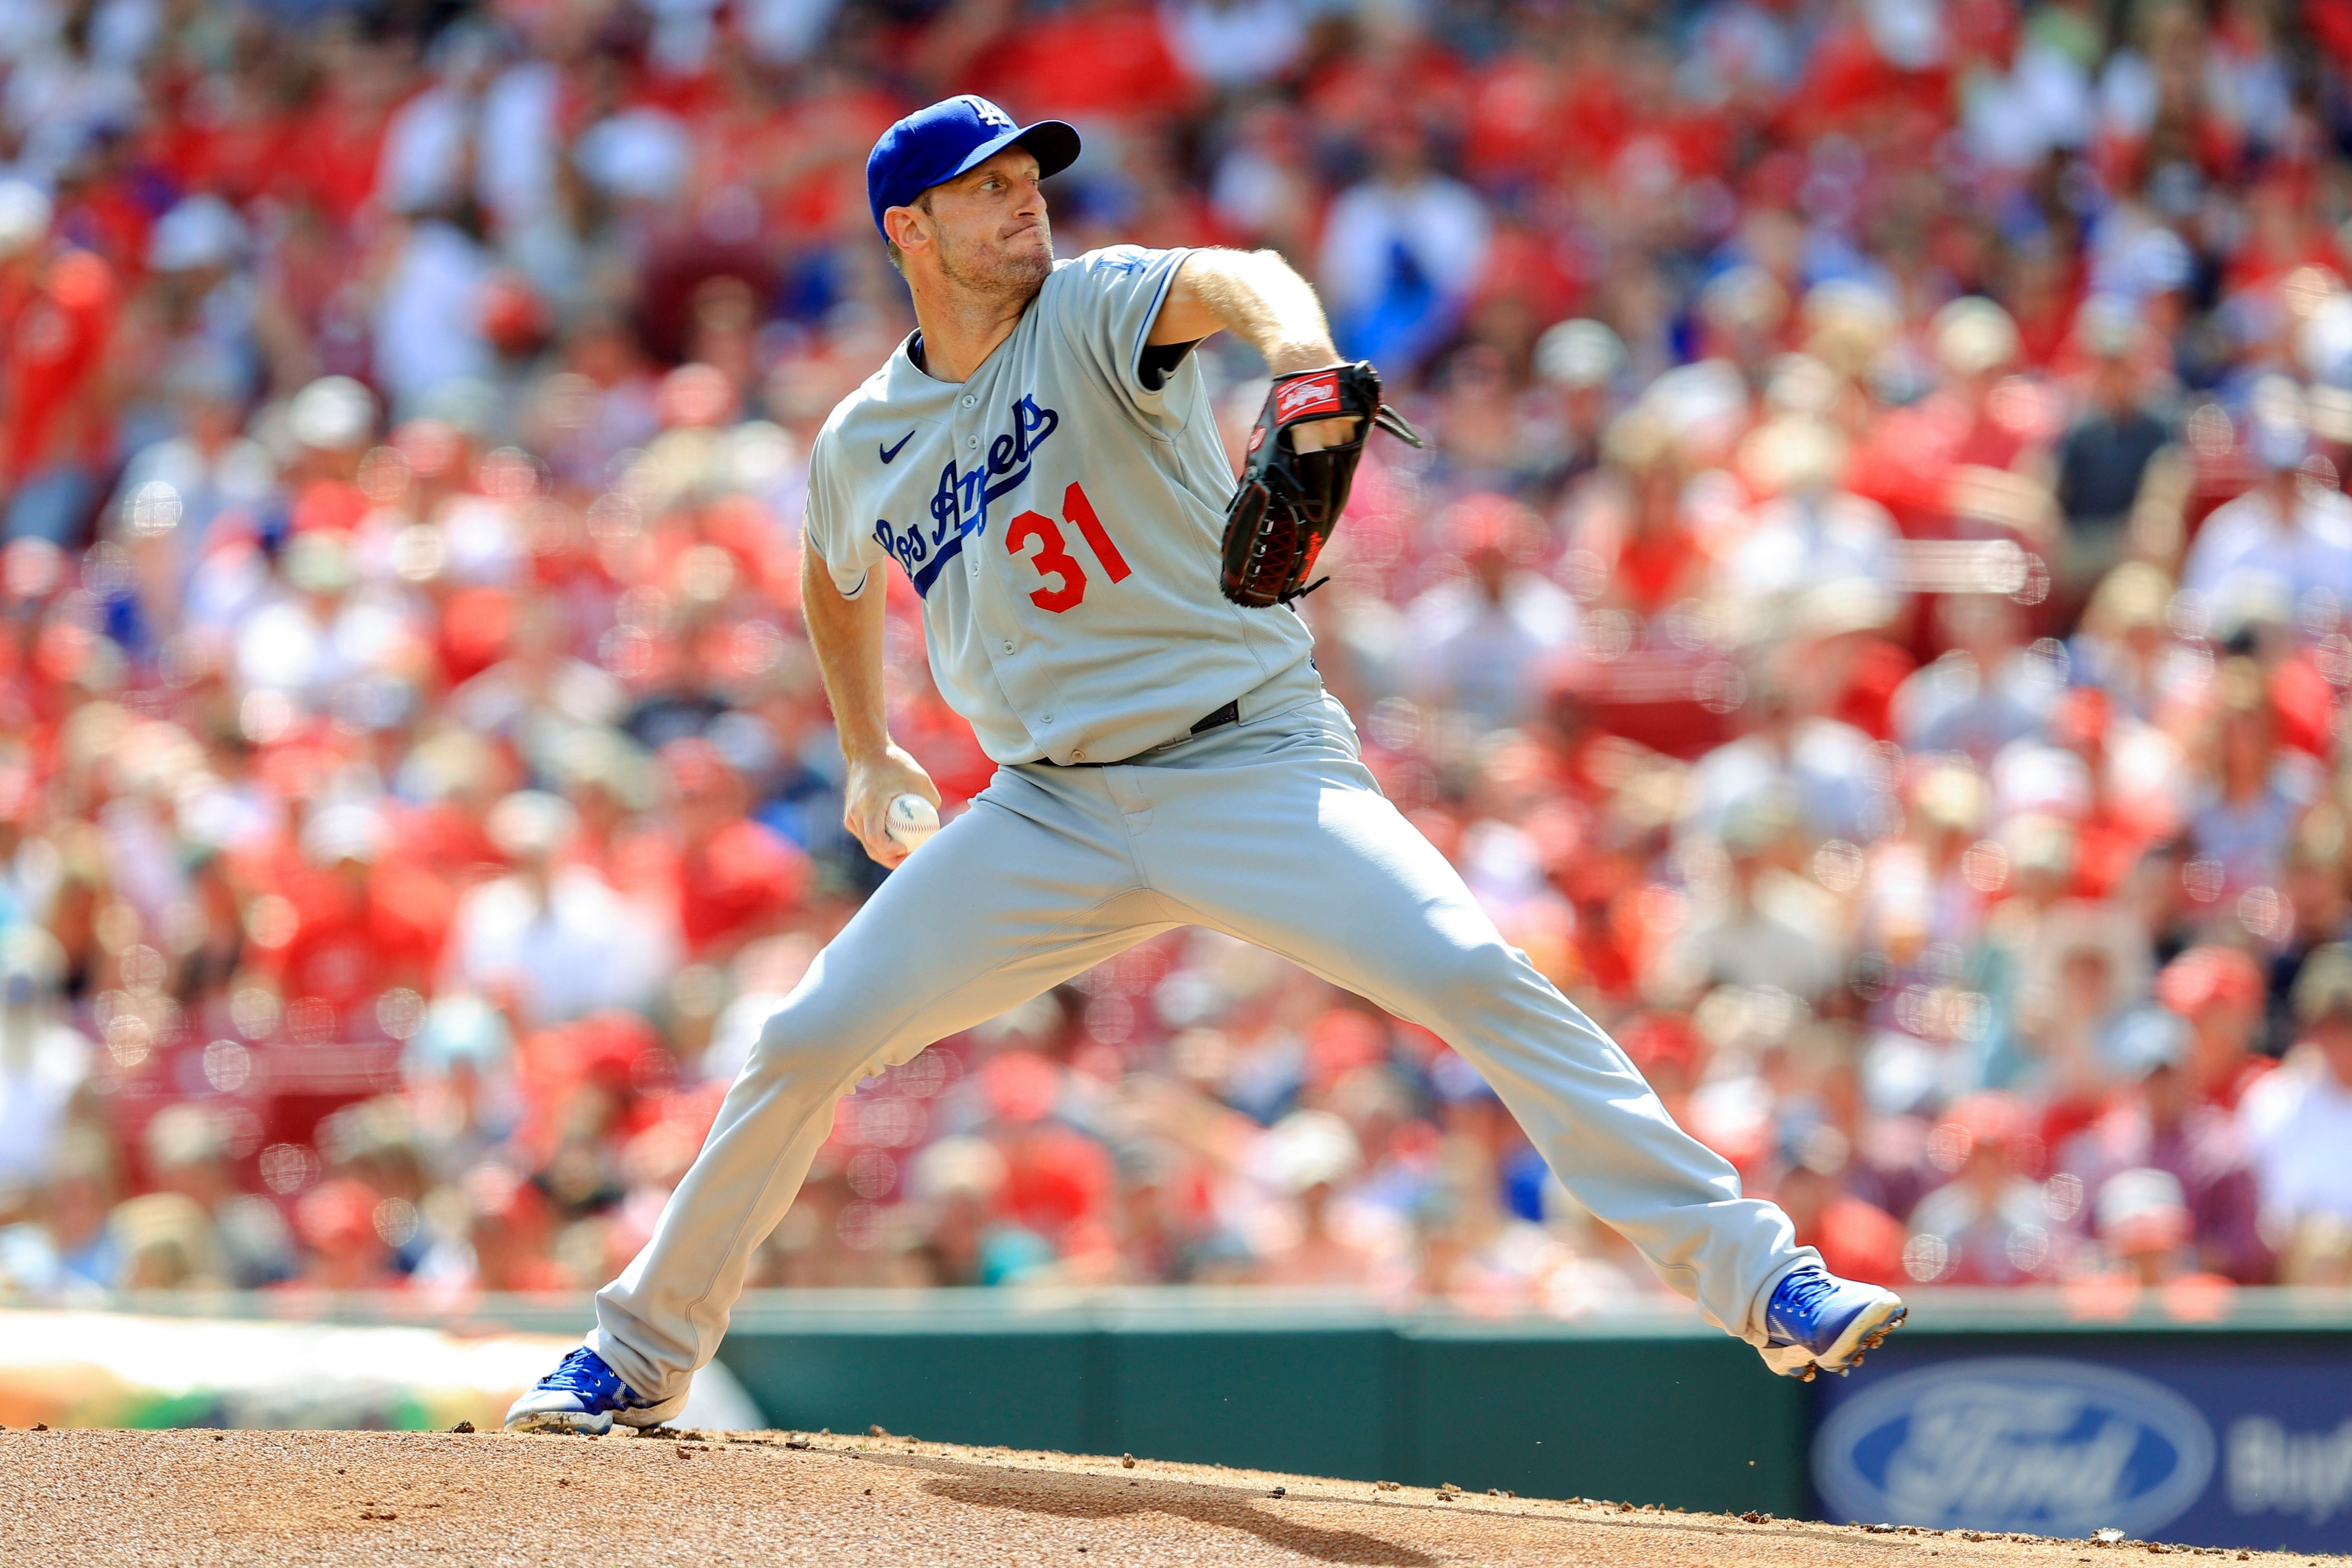 This Is How Clayton Kershaw Dominates - PITCH BREAKDOWN 